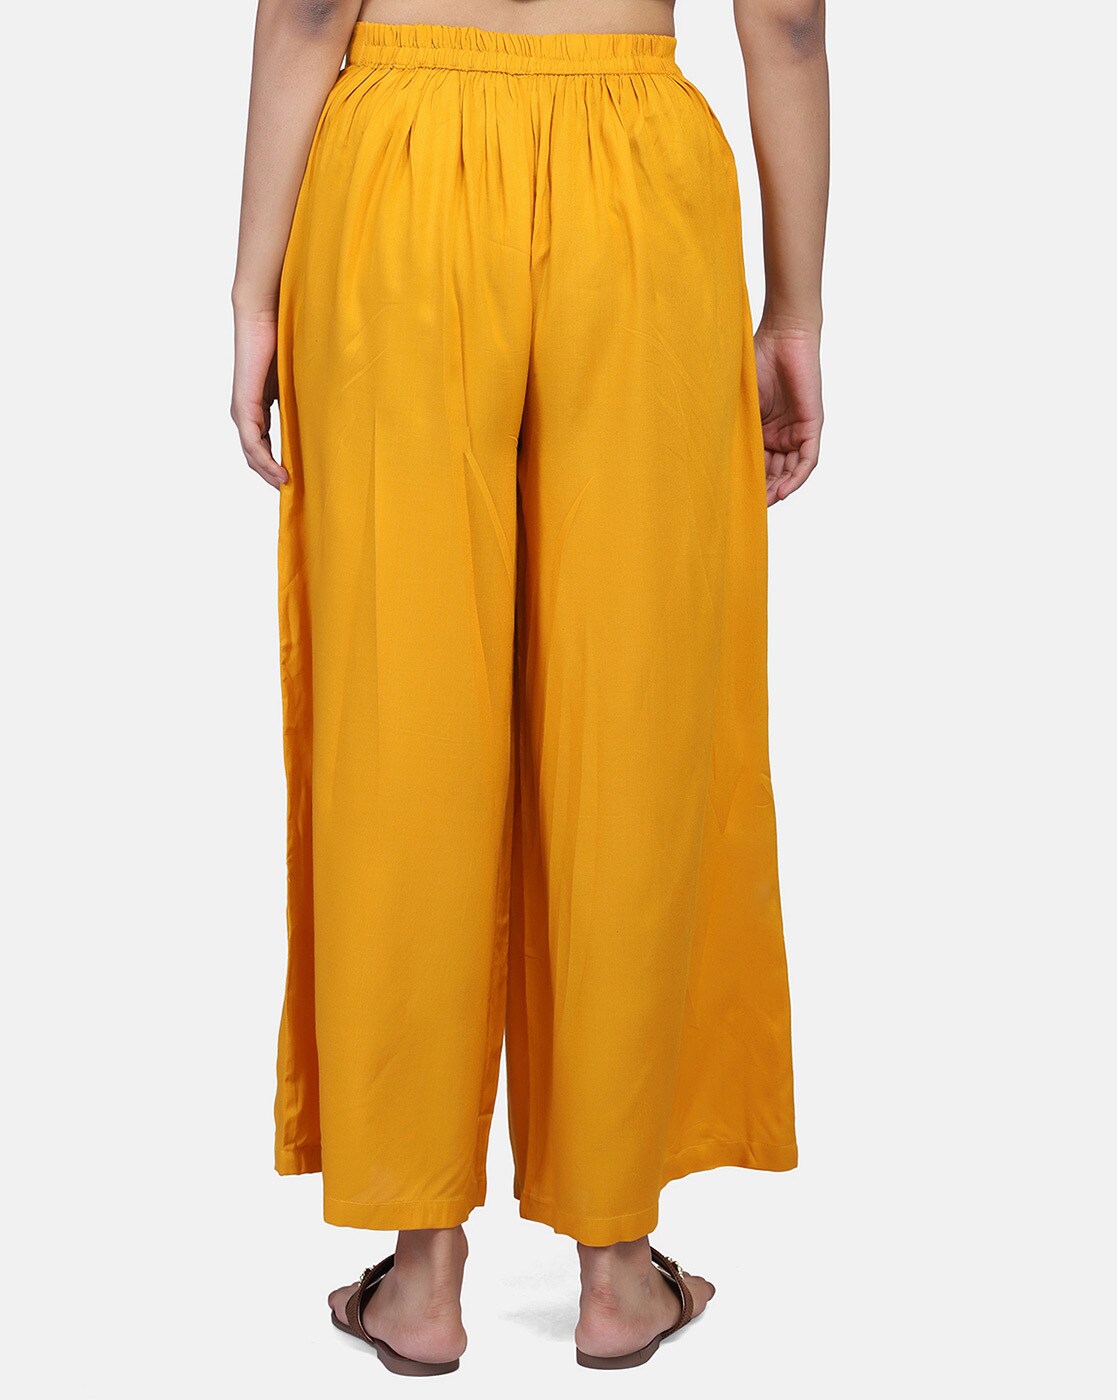 Buy Black Lycra Top with Yellow Palazzo Pants for Girls Online